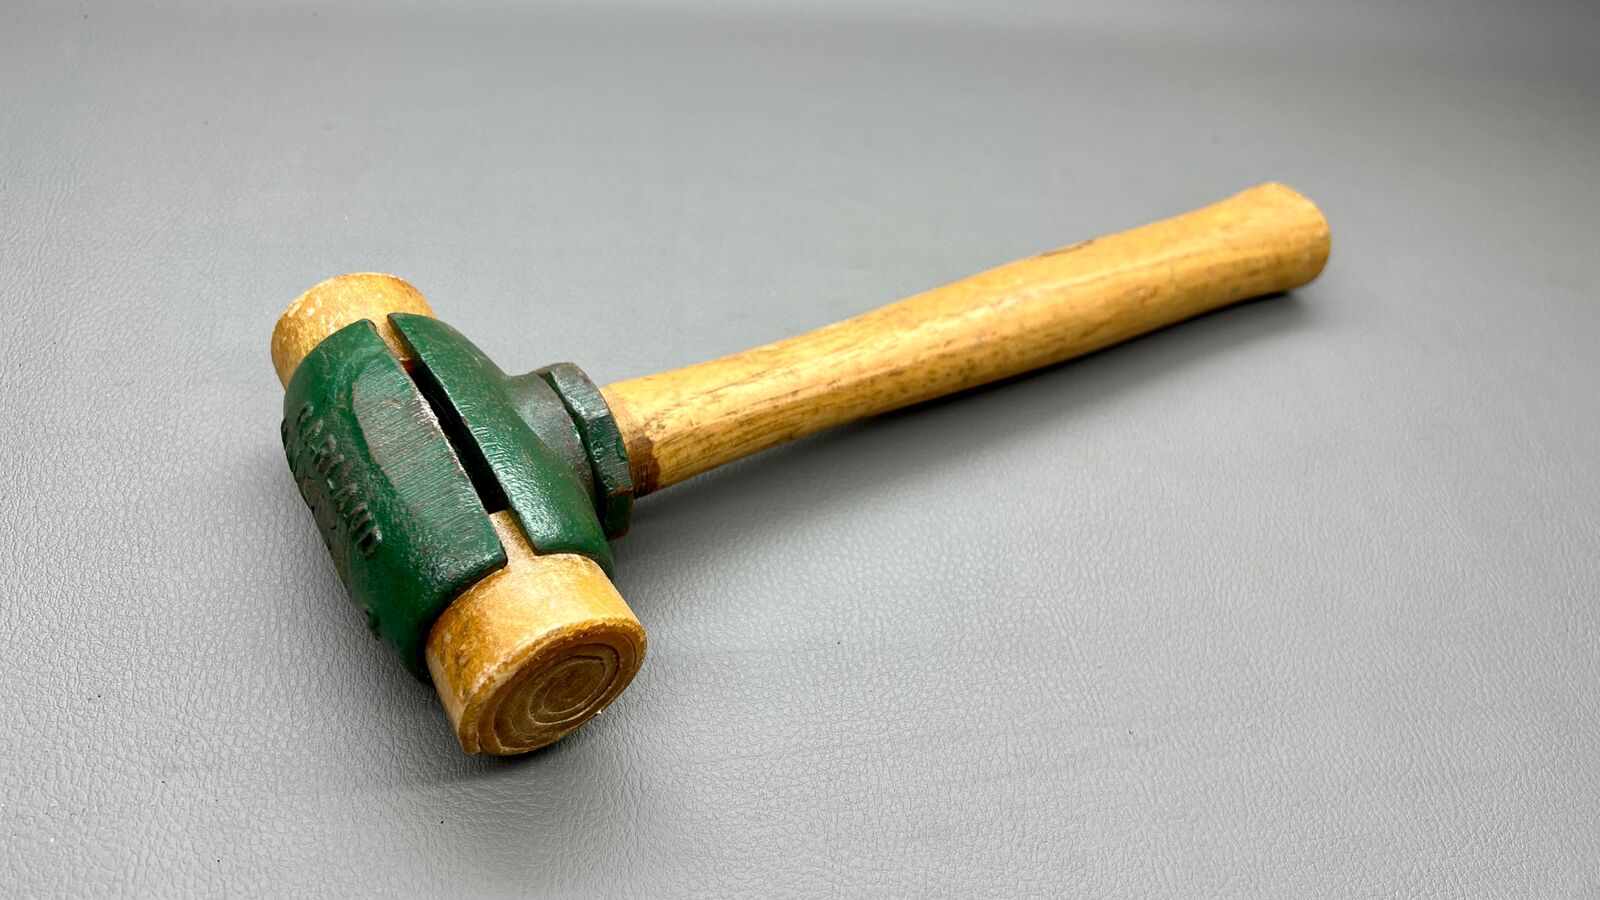 Garland Rawhide Split Head Hammer No 2 In Top Condition With 48mm Faces 115mm Wide